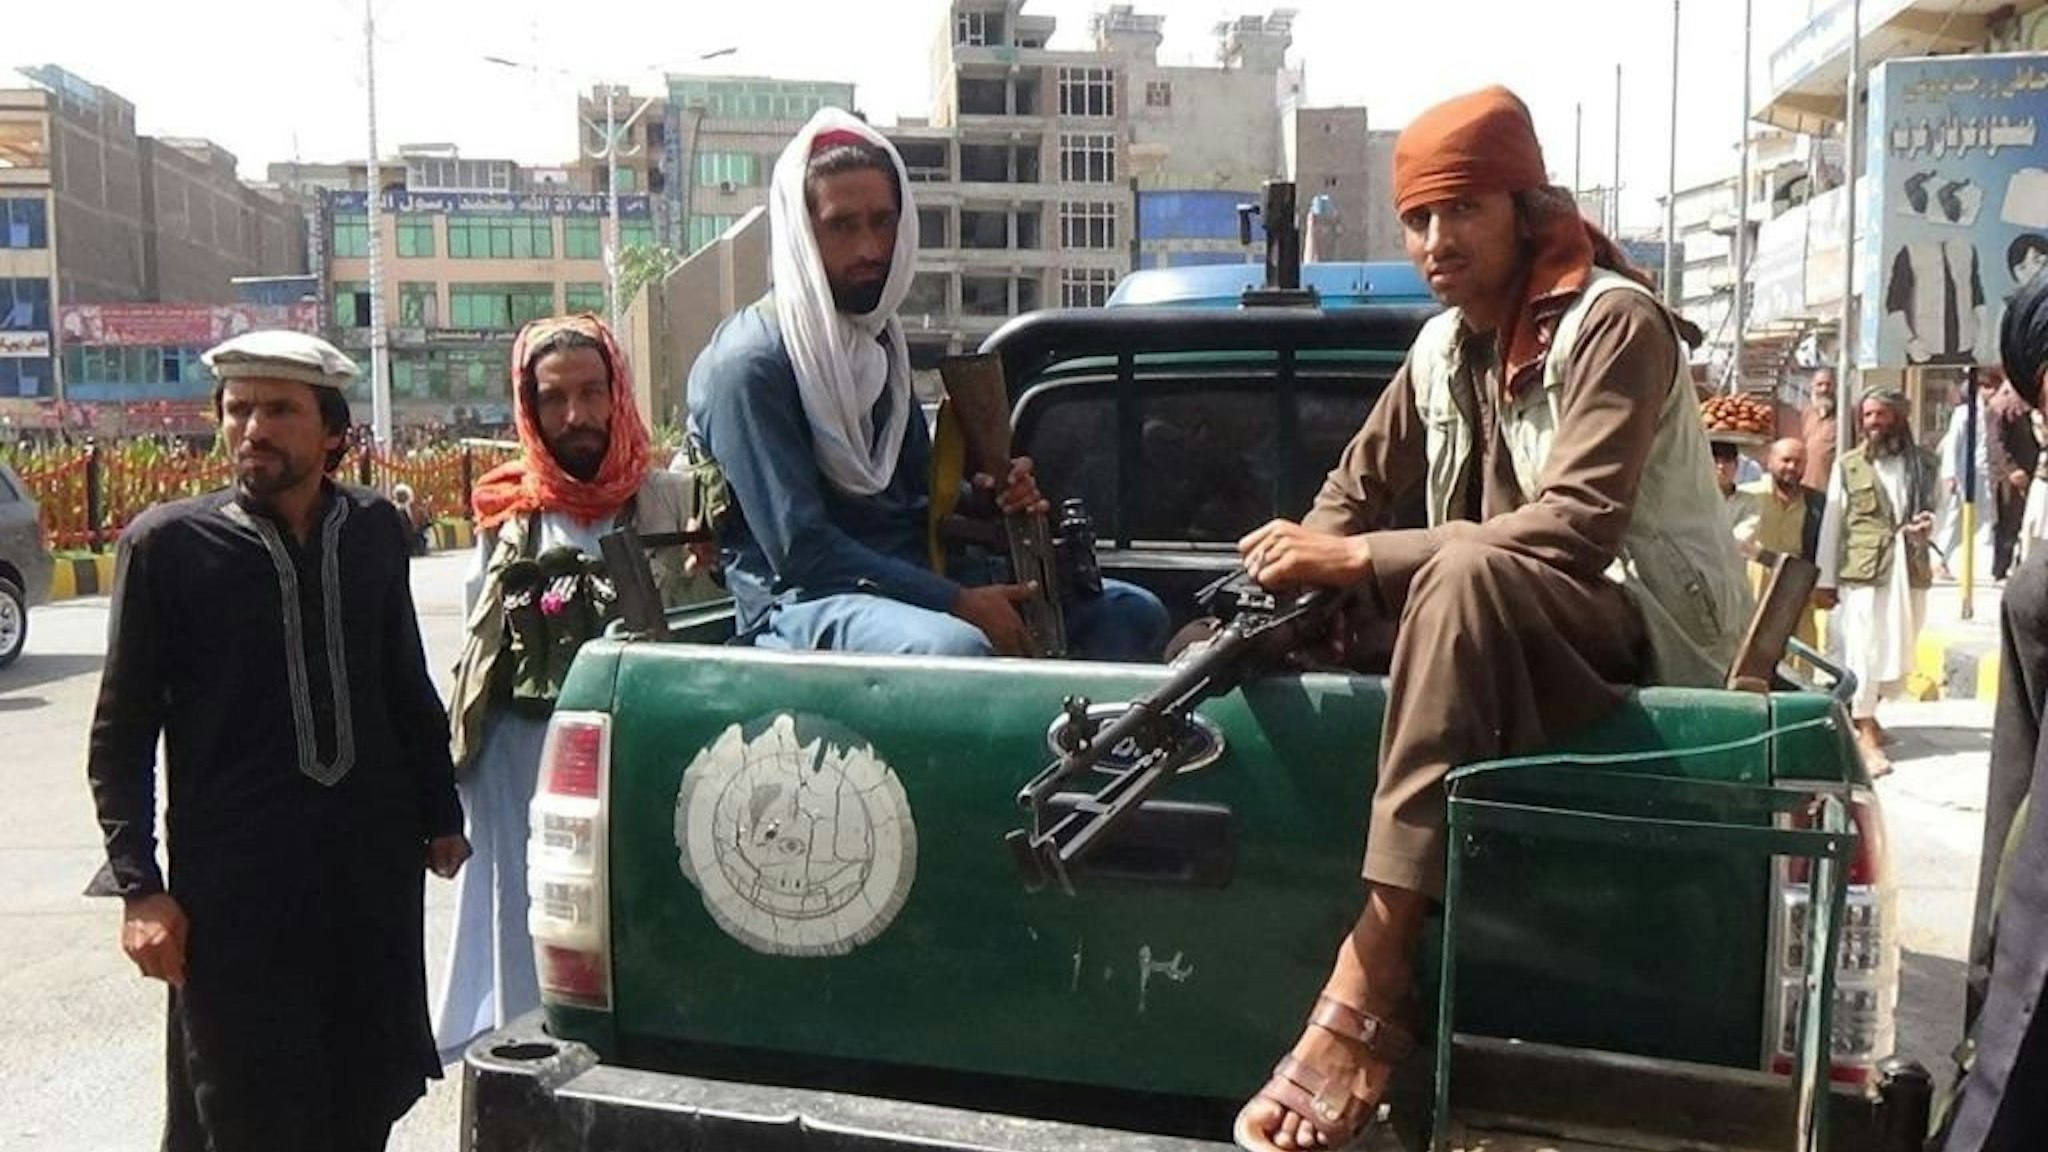 JALALABAD, AFGHANISTAN - AUGUST 18: Taliban check points are seen in the streets of Jalalabad city, Afghanistan on August 18, 2021, as Taliban take control of Afghanistan after 20 years. (Photo by Stringer/Anadolu Agency via Getty Images)